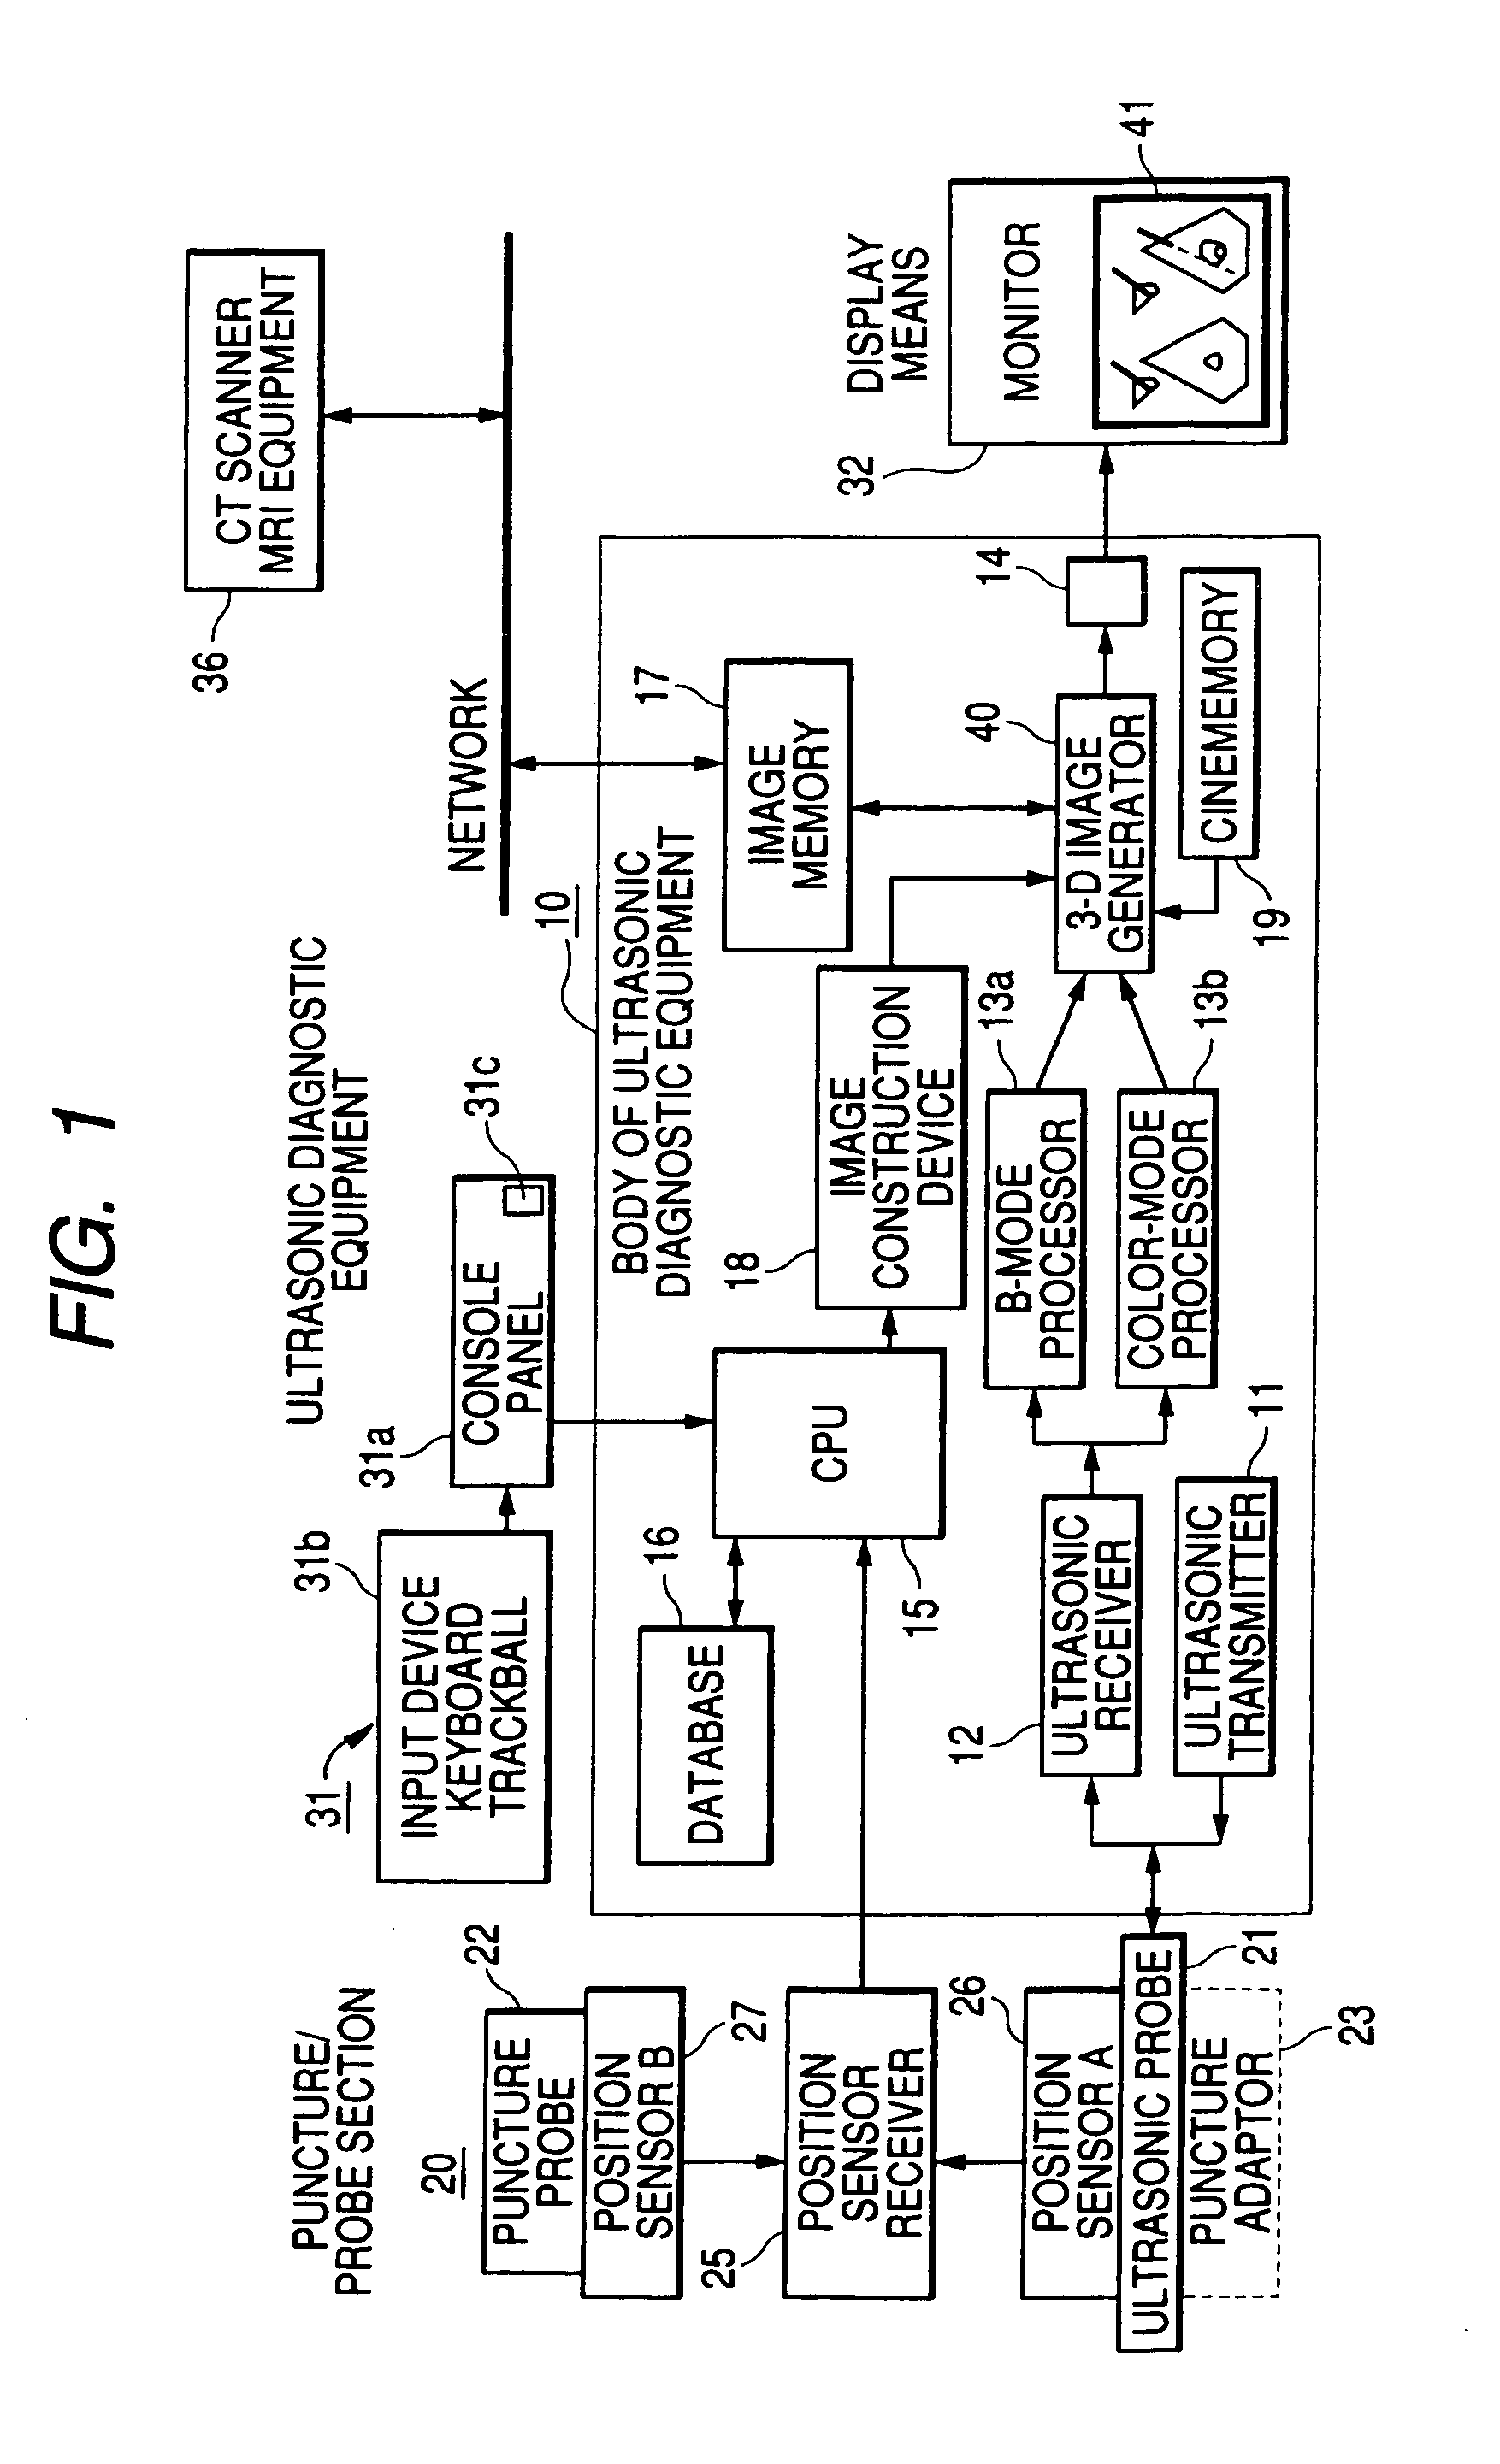 Ultrasonic diagnostic apparatus for fixedly displaying a puncture probe during 2D imaging